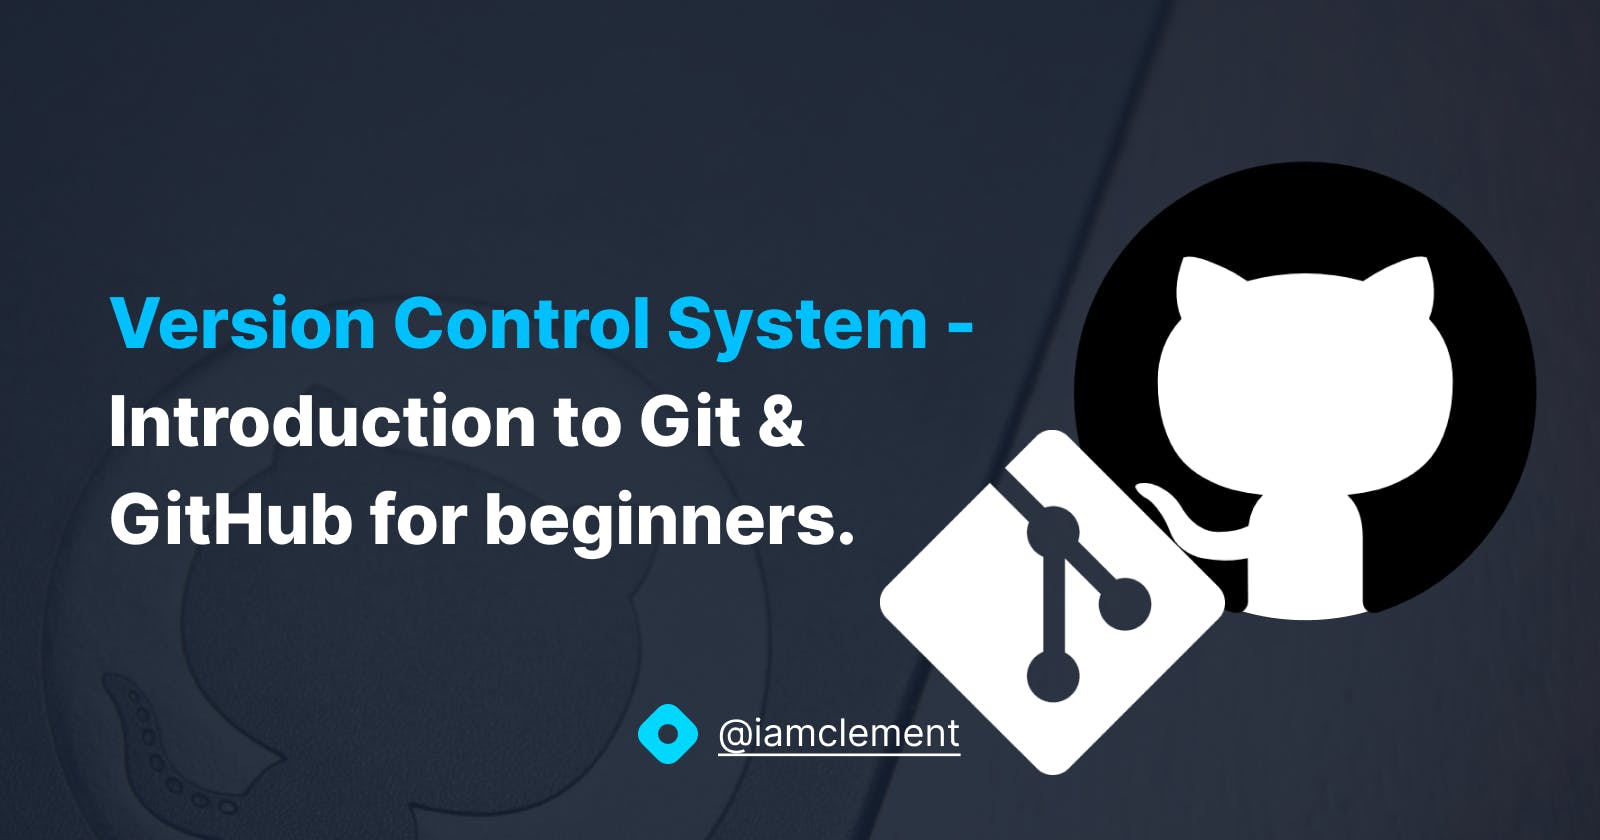 Version Control System - Introduction to Git & GitHub for beginners.